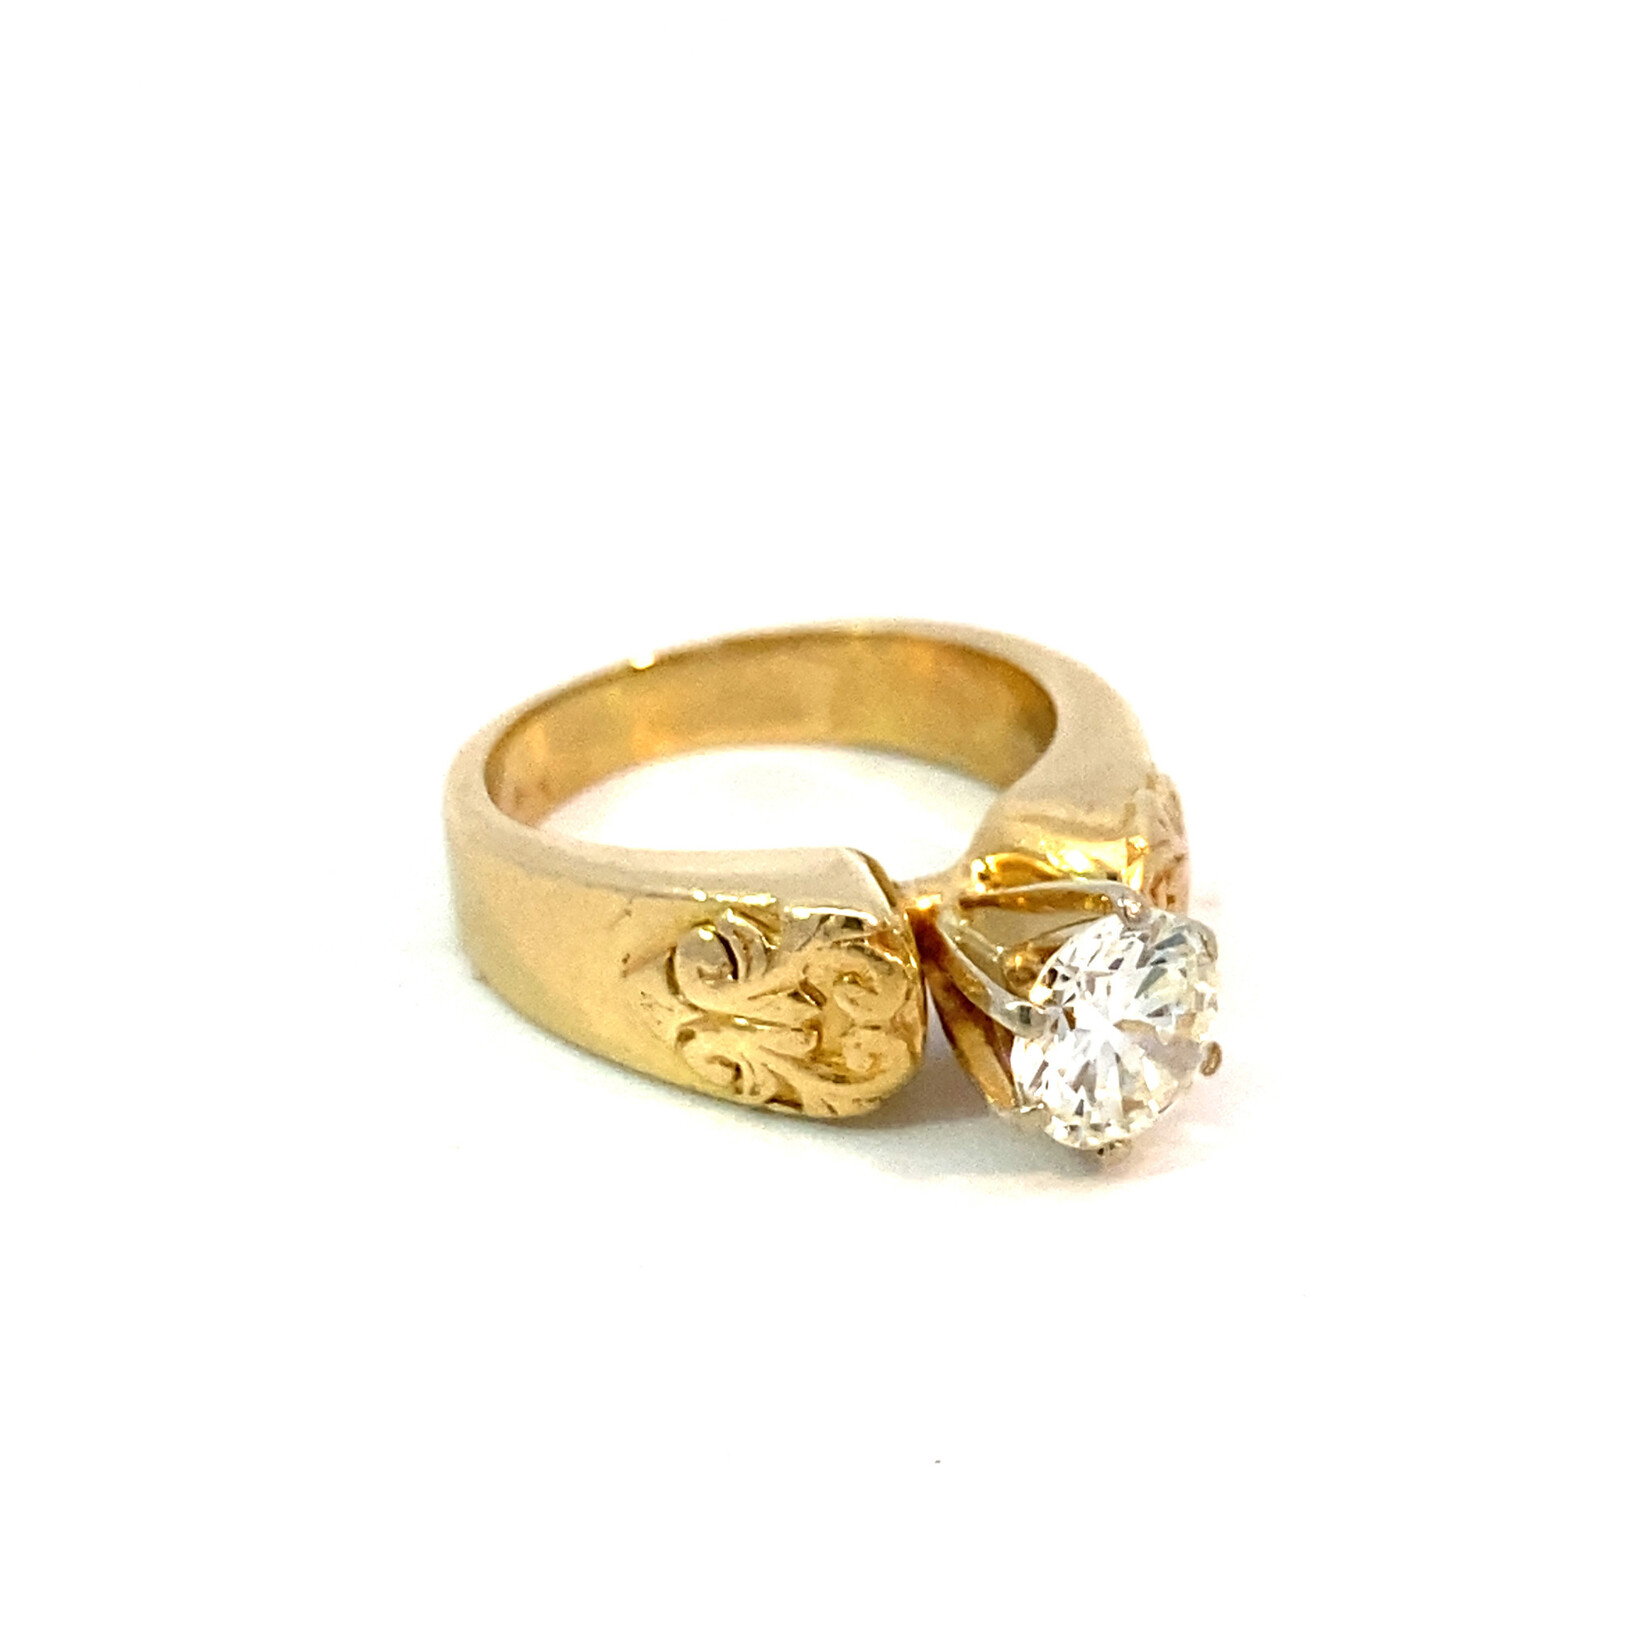 14K Yellow Gold Diamond Solitaire Ring 1ct VS1/H size 5.25